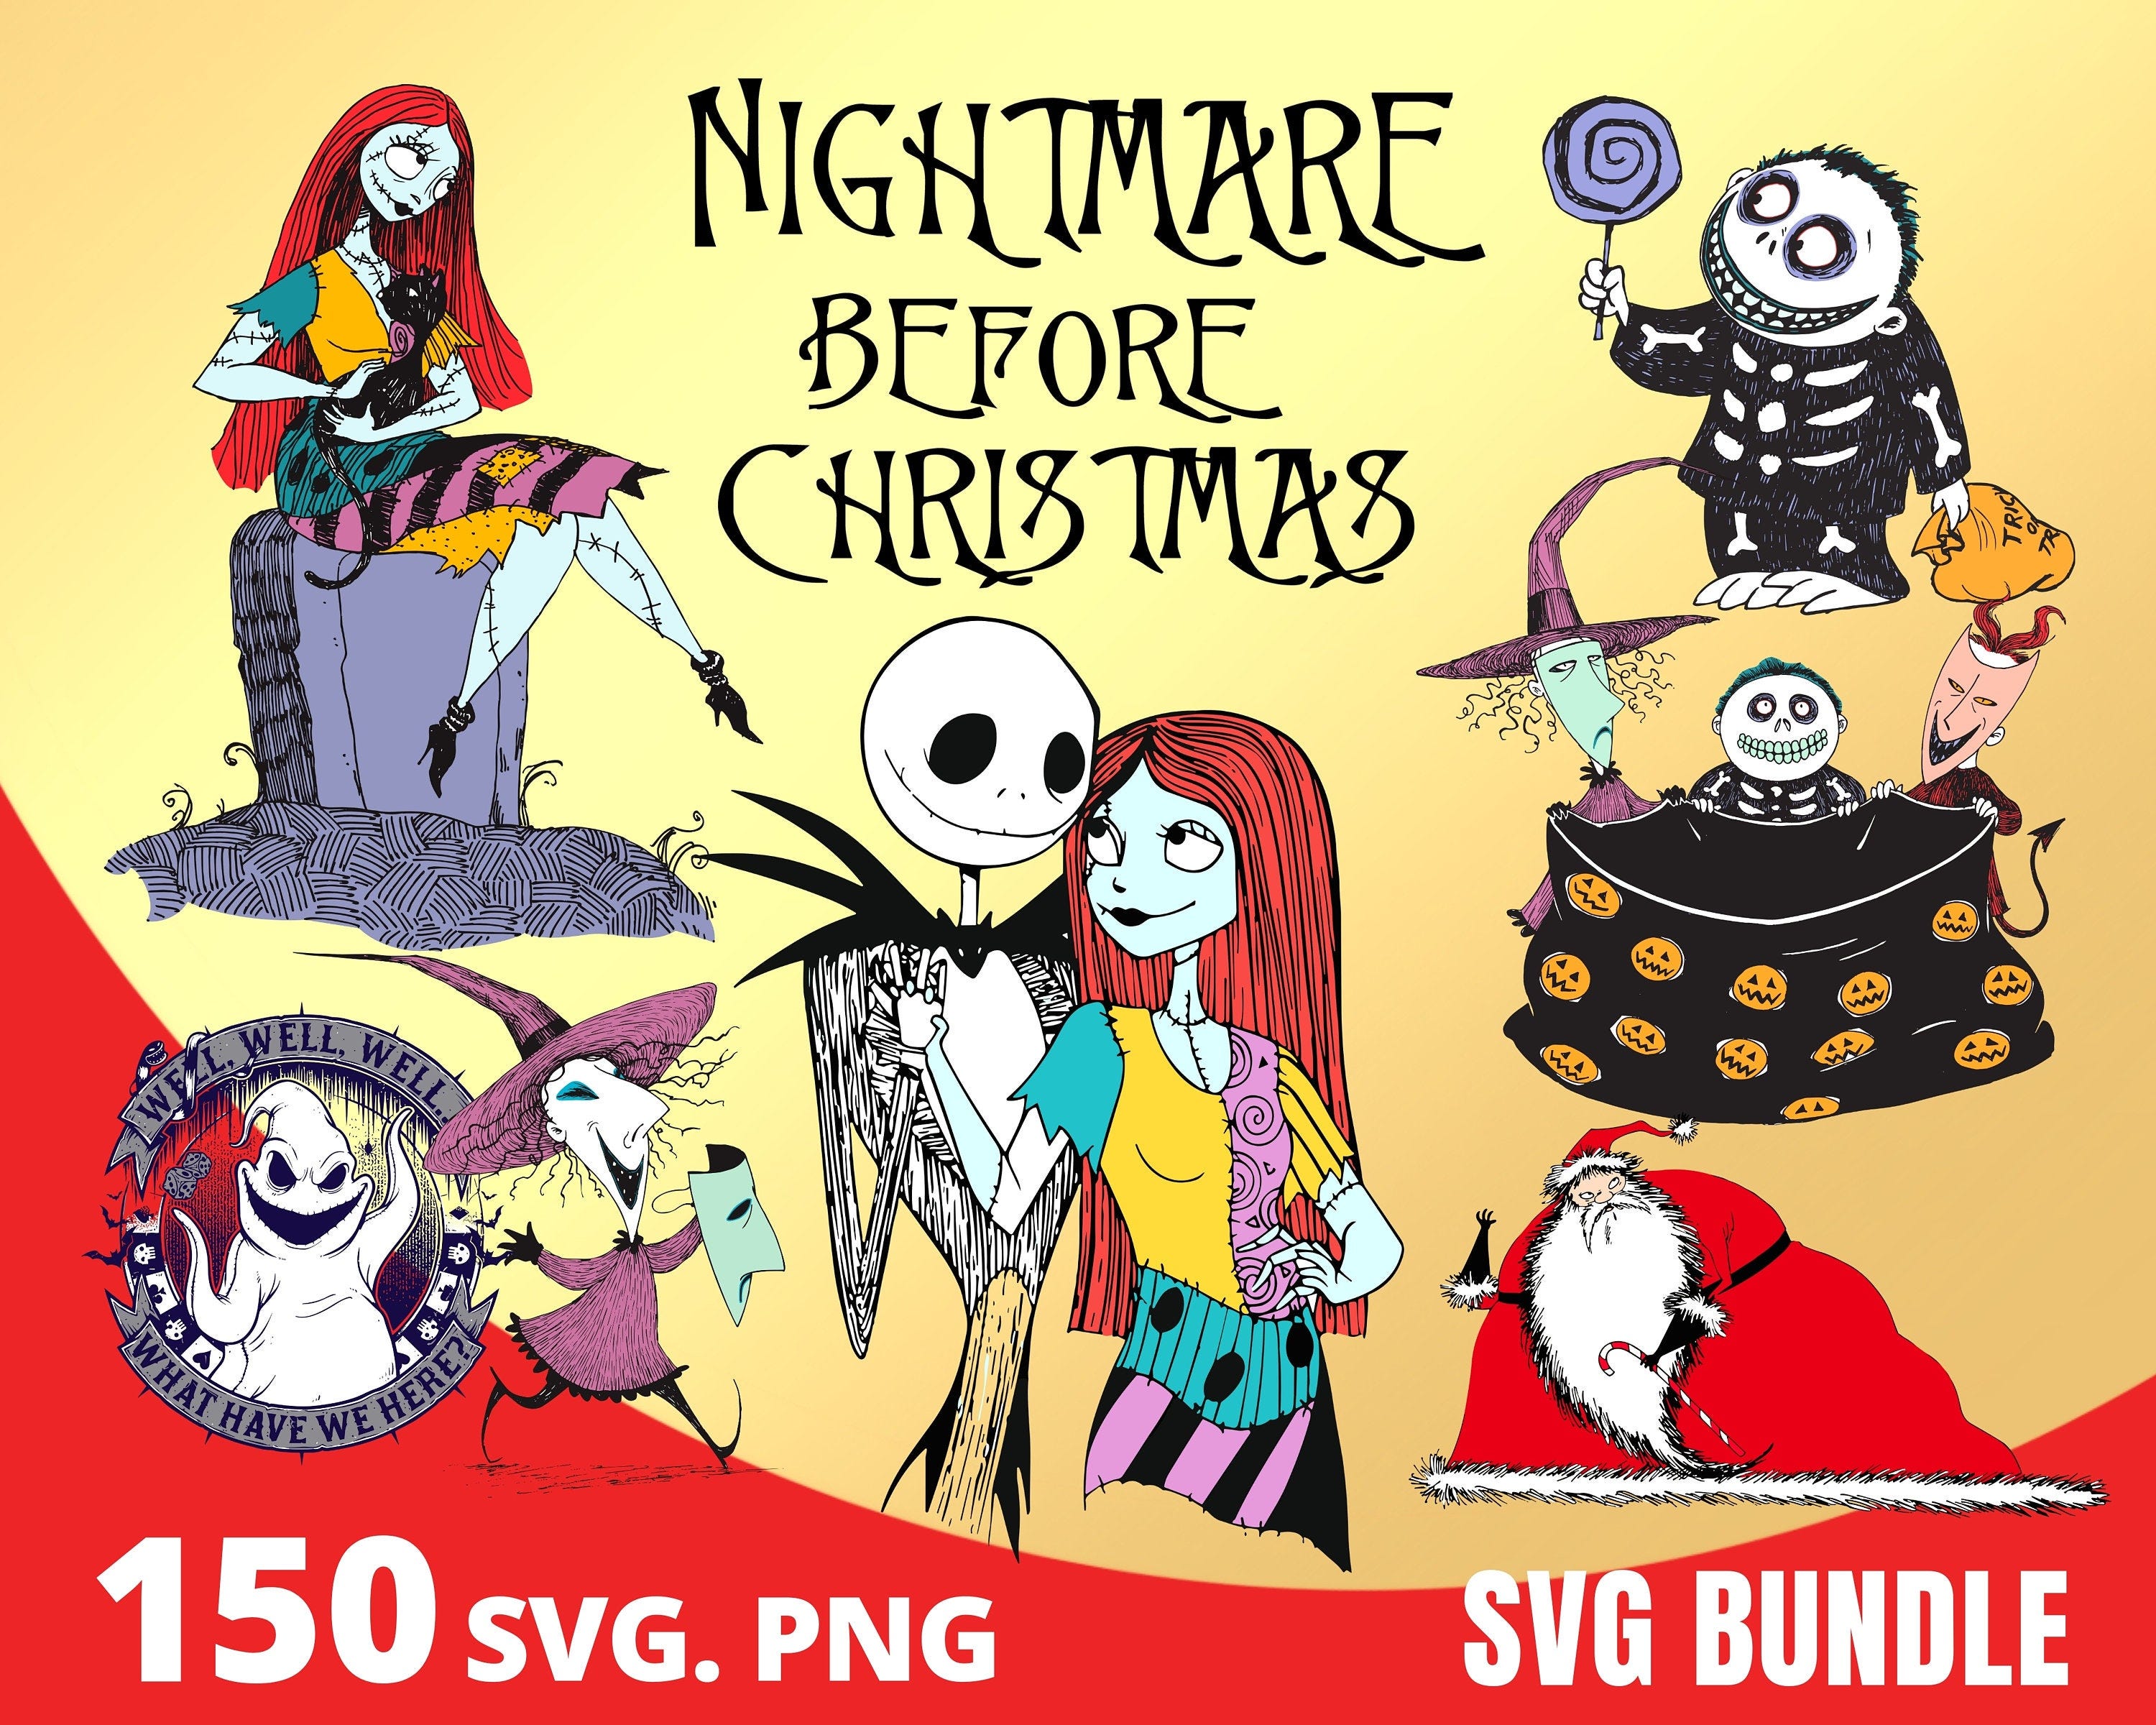 Nightmare Before Christmas SVG Bundle, Jack Skellington Clipart PNG, Jack and Sally Layered SVG, Halloween Town Theme Party